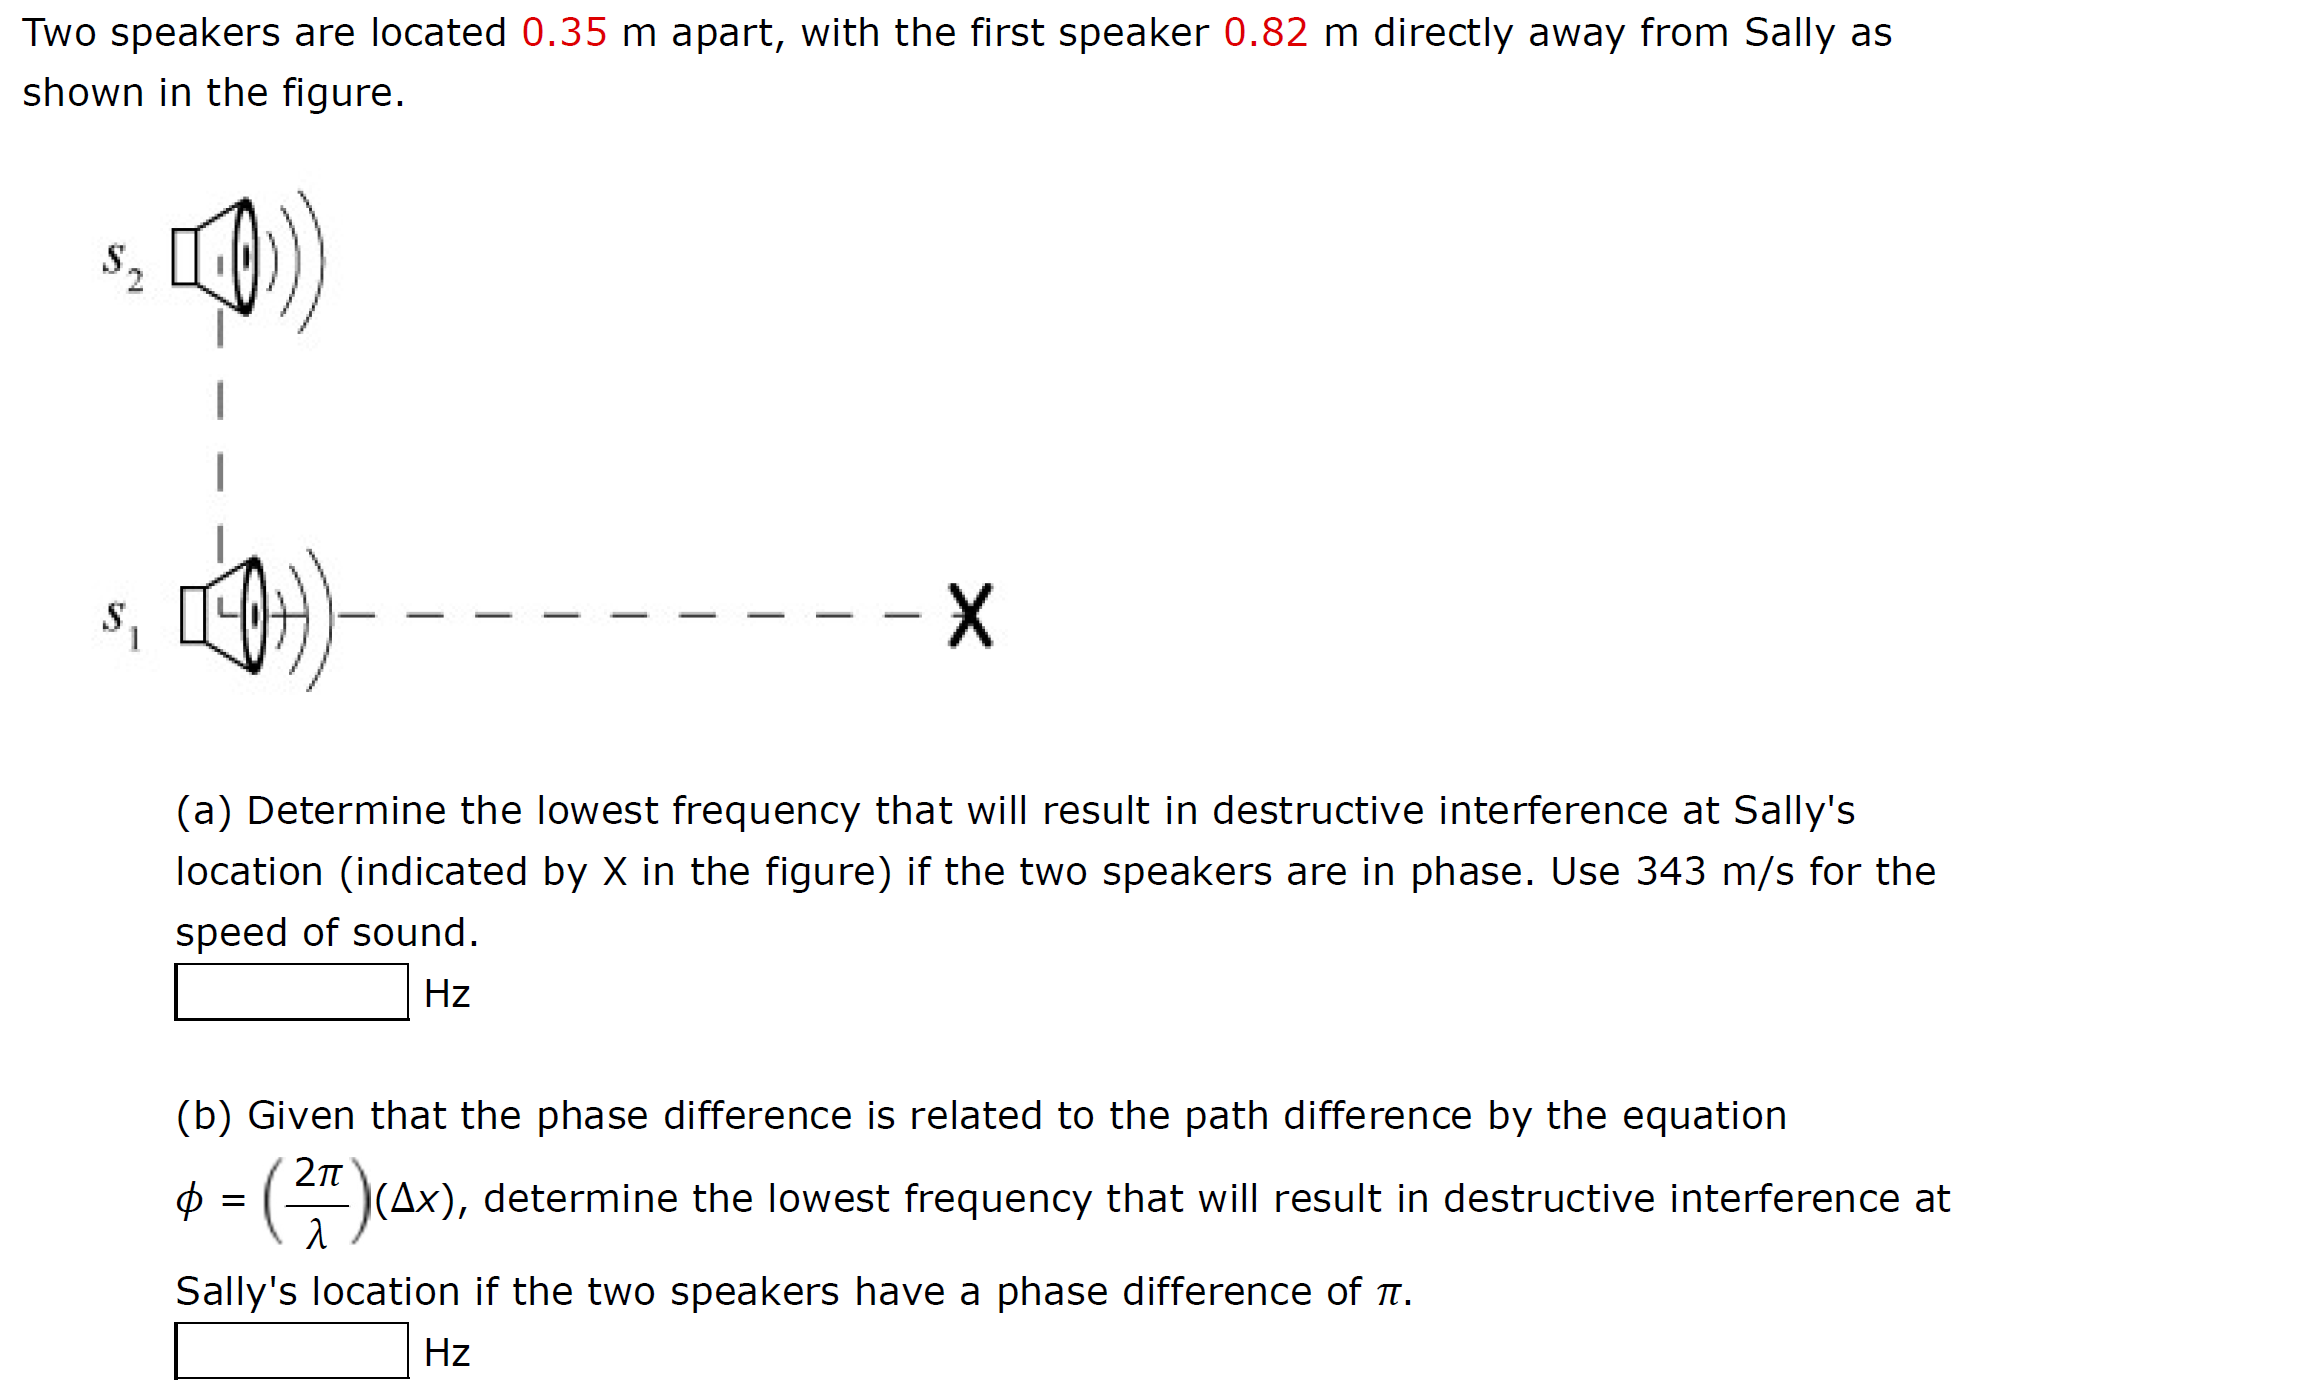 Two speakers are located 0.35 m apart, with the first speaker 0.82 m directly away from Sally as
shown in the figure.
S.
- X
S.
(a) Determine the lowest frequency that will result in destructive interference at Sally's
location (indicated by X in the figure) if the two speakers are in phase. Use 343 m/s for the
speed of sound.
Hz
(b) Given that the phase difference is related to the path difference by the equation
|(Ax), determine the lowest frequency that will result in destructive interference at
Sally's location if the two speakers have a phase difference of T.
Hz
